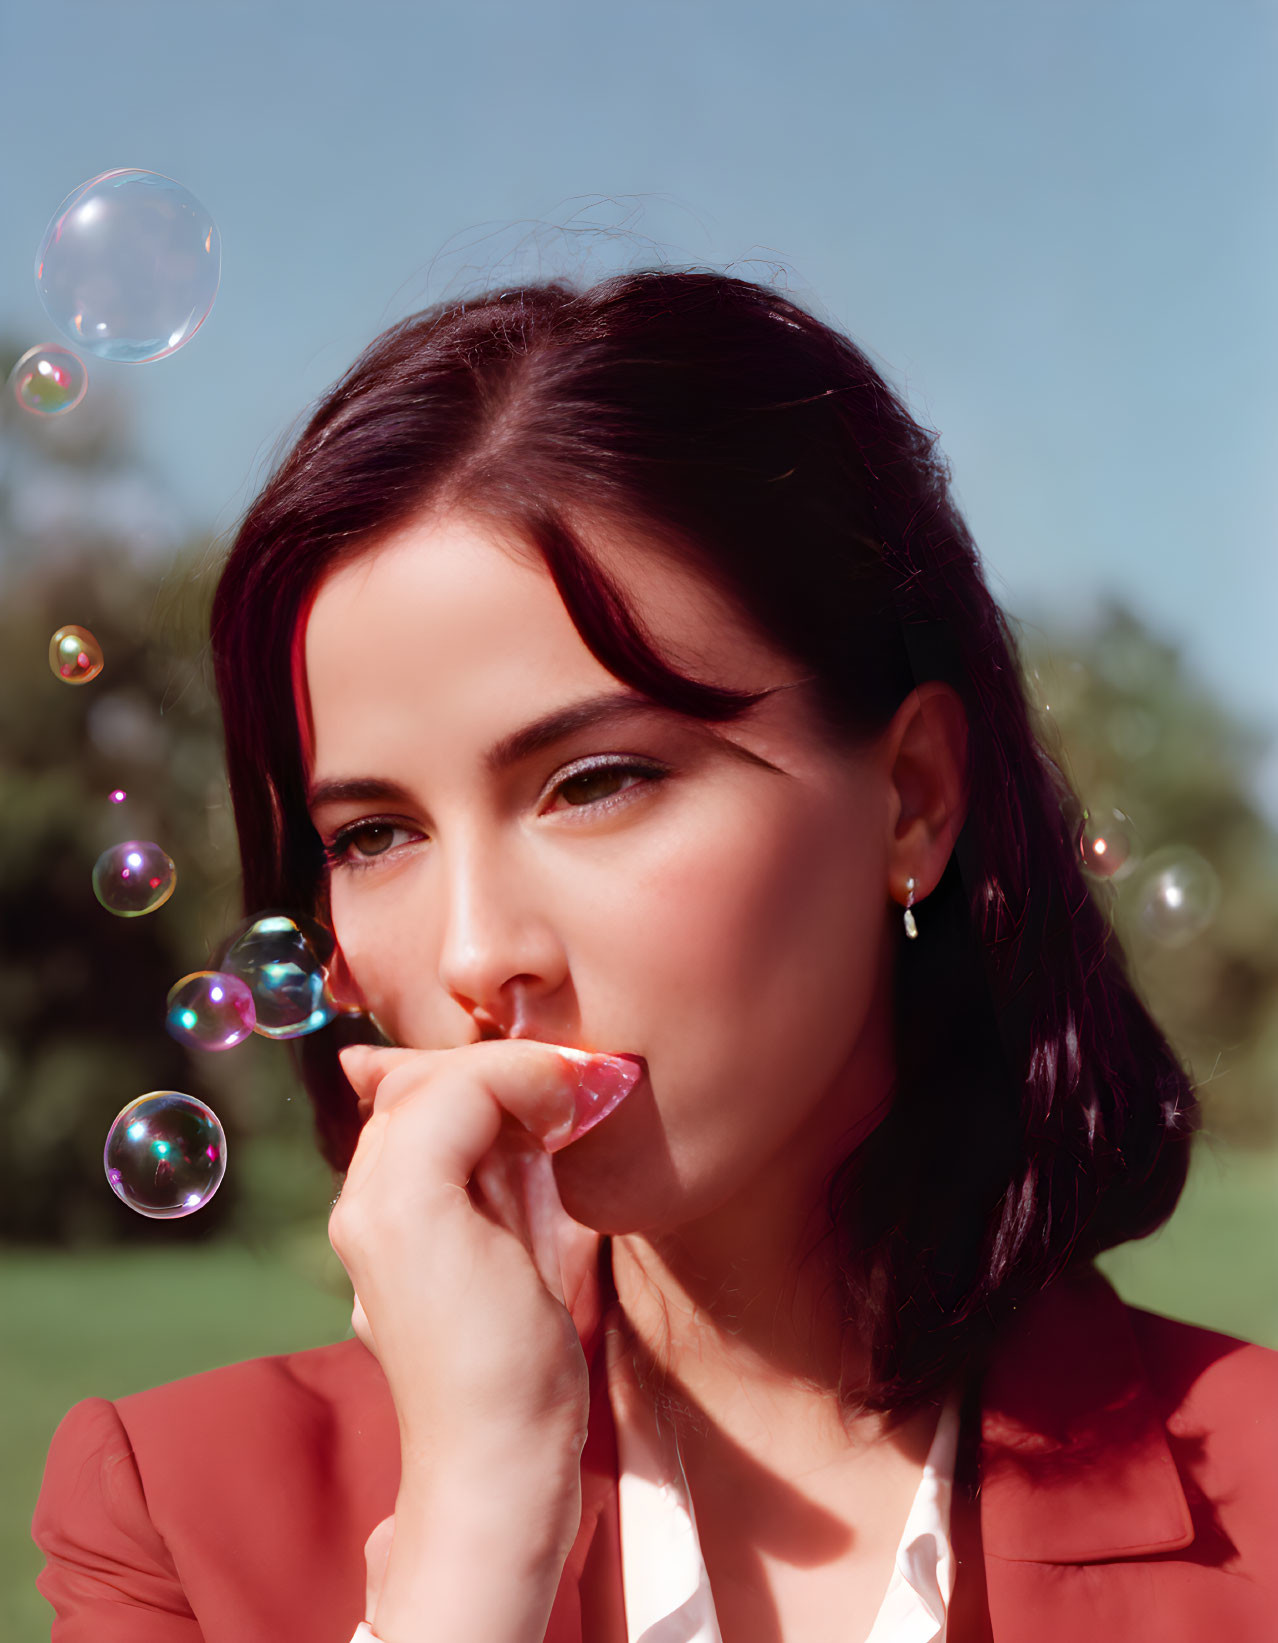 Woman in Red Jacket with Finger on Lips Surrounded by Bubbles in Green Outdoor Setting